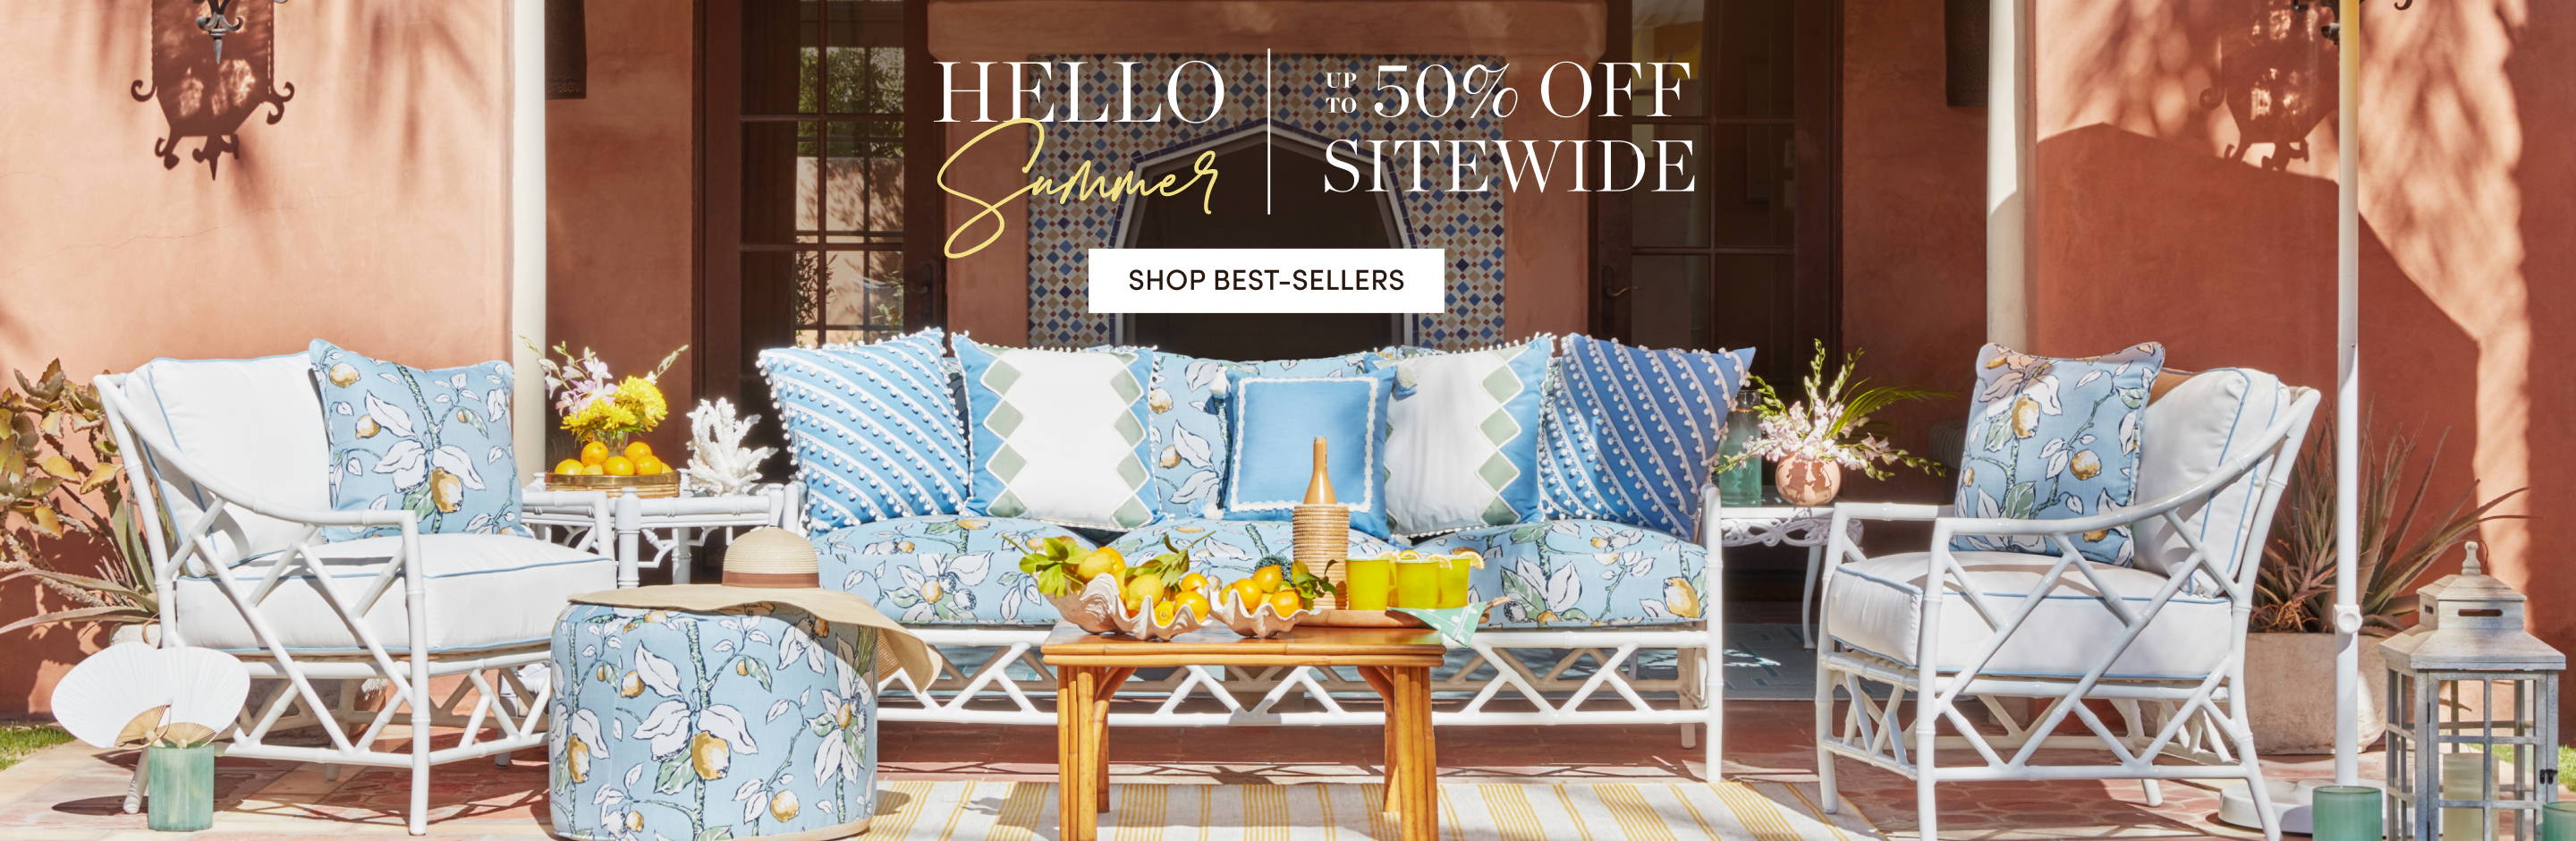 Up to 50% Off Sitewide Shop Best Sellers